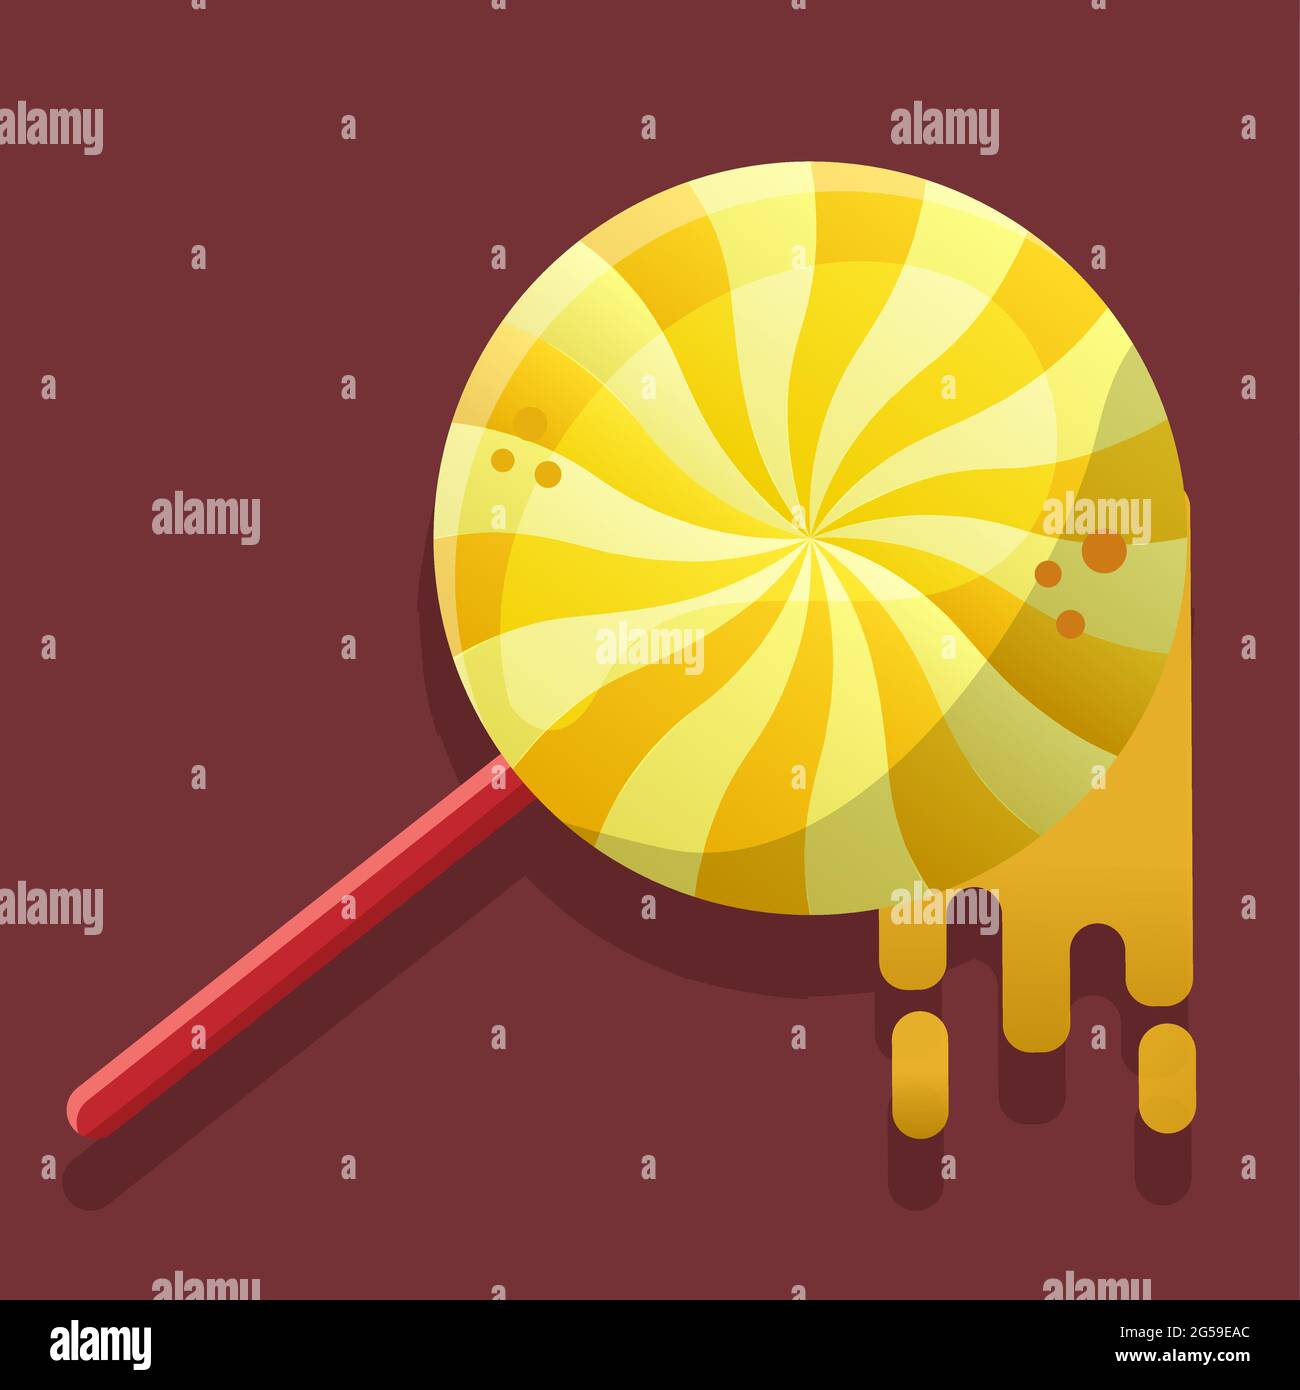 orange candy melting vector illustration in flat style Stock Vector